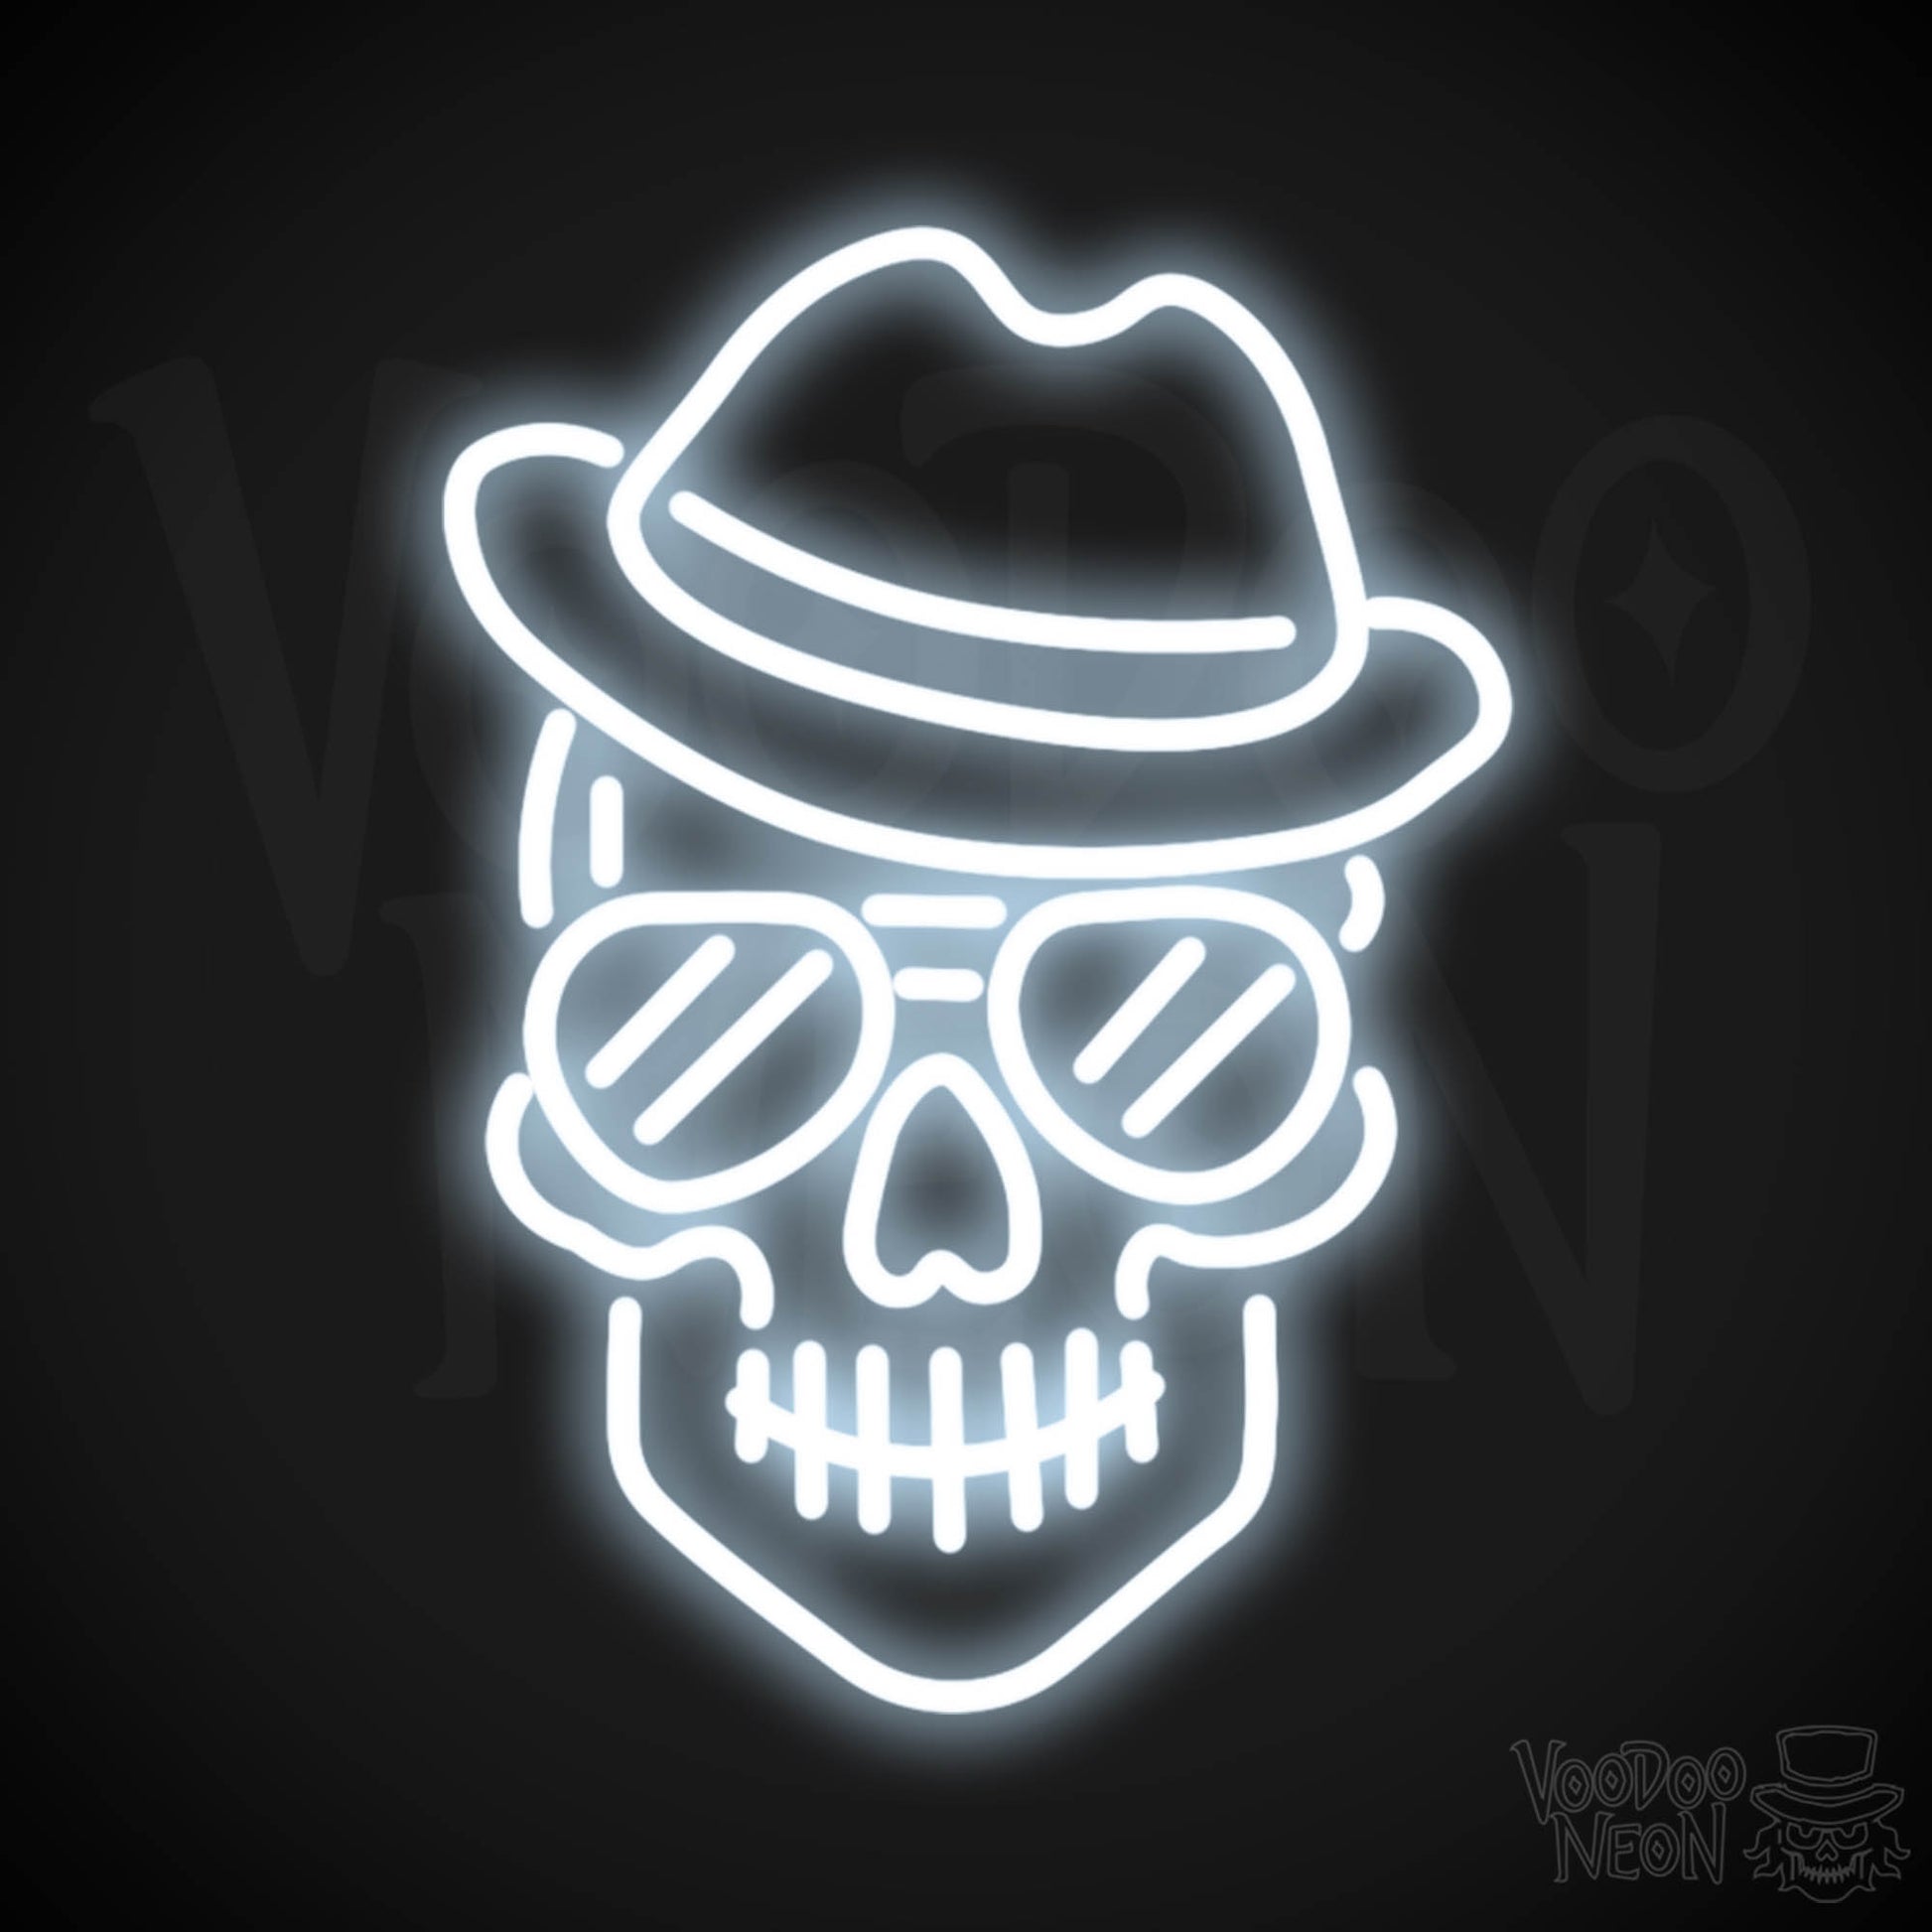 Skull Face Neon Sign - Neon Skull Face Sign - Neon Skull Light - Wall Art - Color Cool White